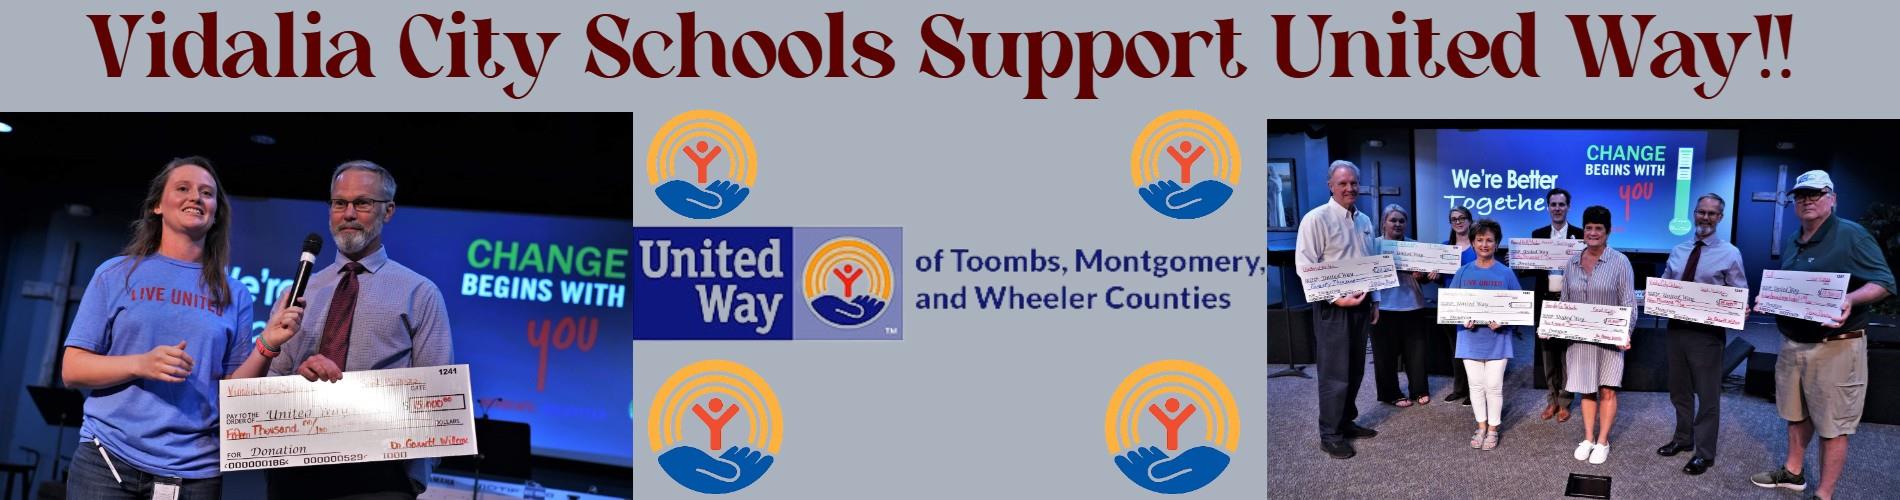 United Way Support Banner